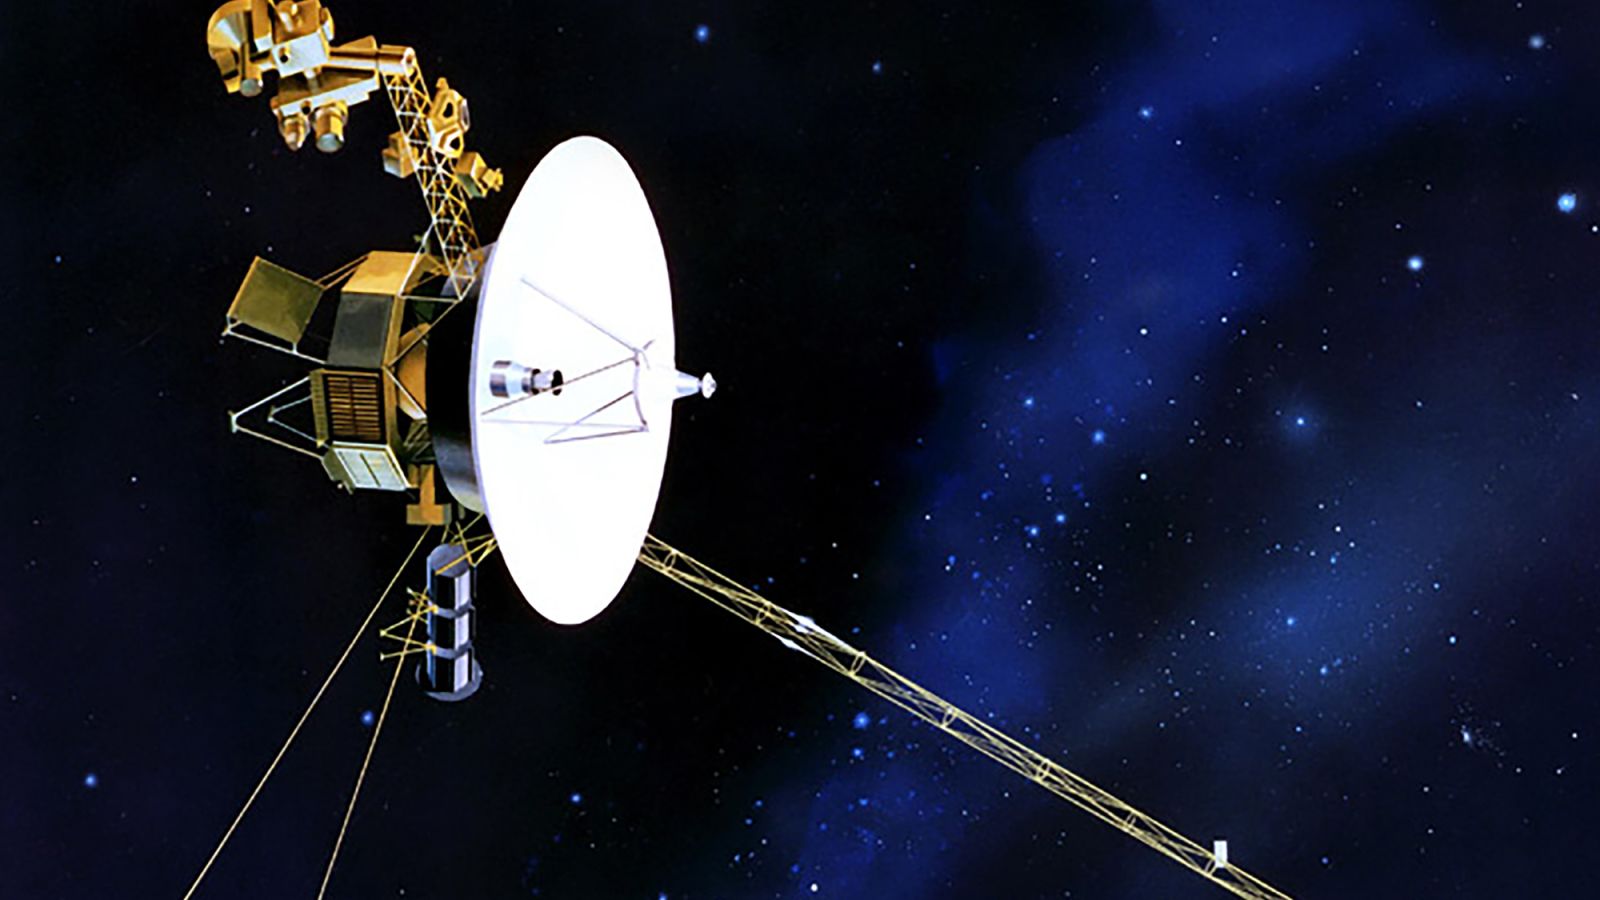 The older Voyager 1 sends a surprising response after giving Earth a 'nudge'